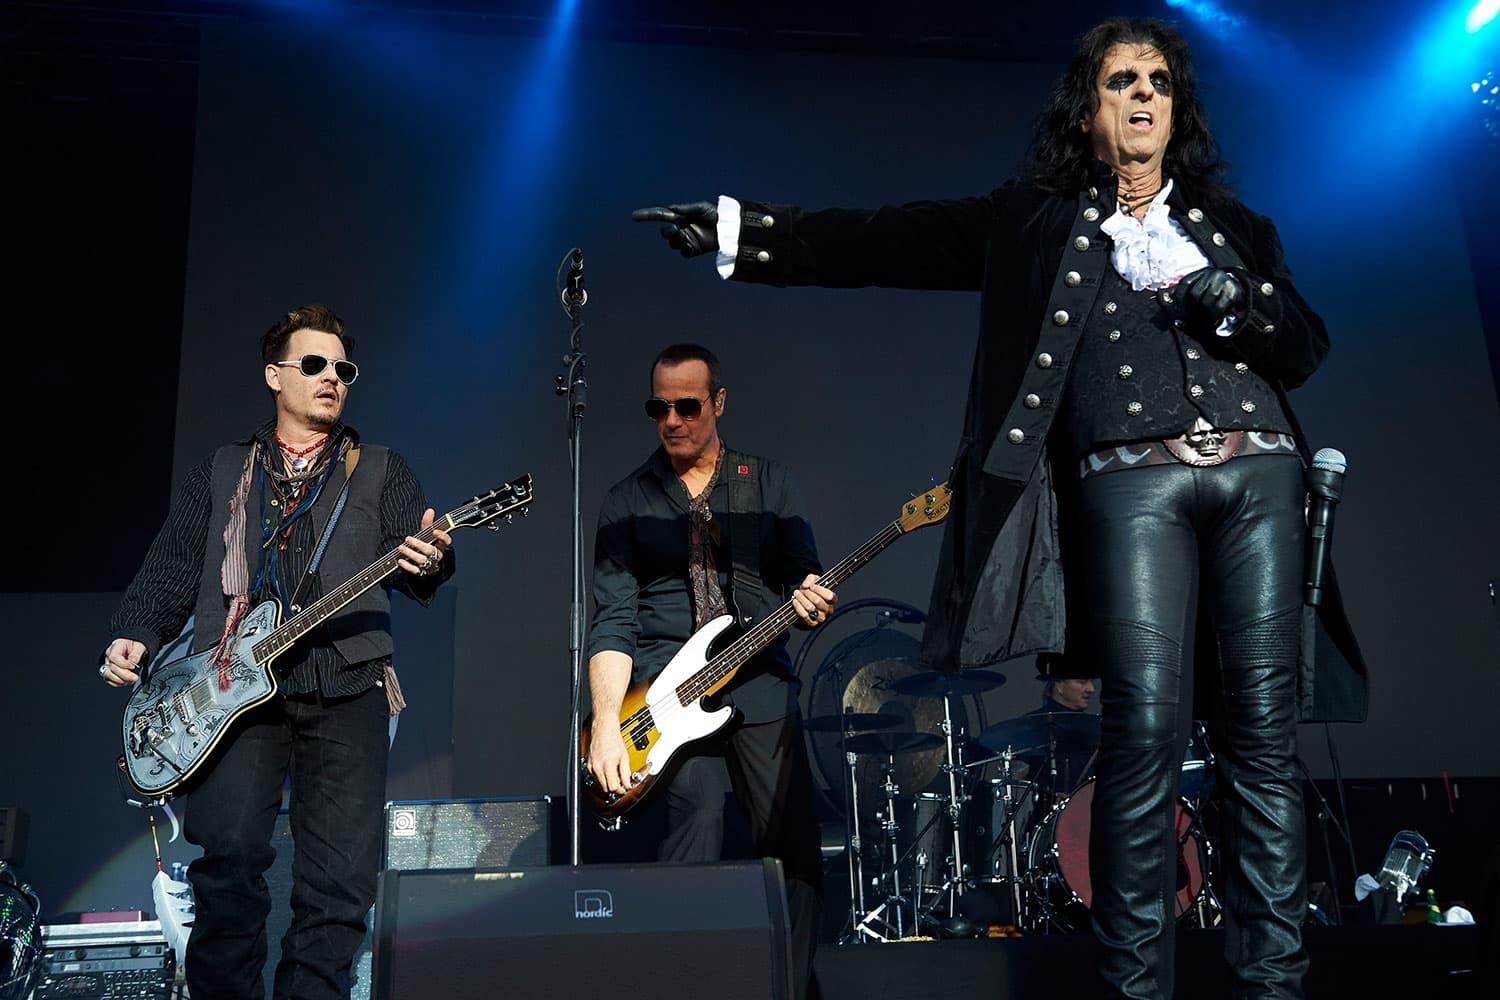 Johnny Depp, left, and Alice Cooper, right, lead the Hollywood Vampires during a performance in Denmark on June 1. (Claus Bonnerup/Polfoto via AP)